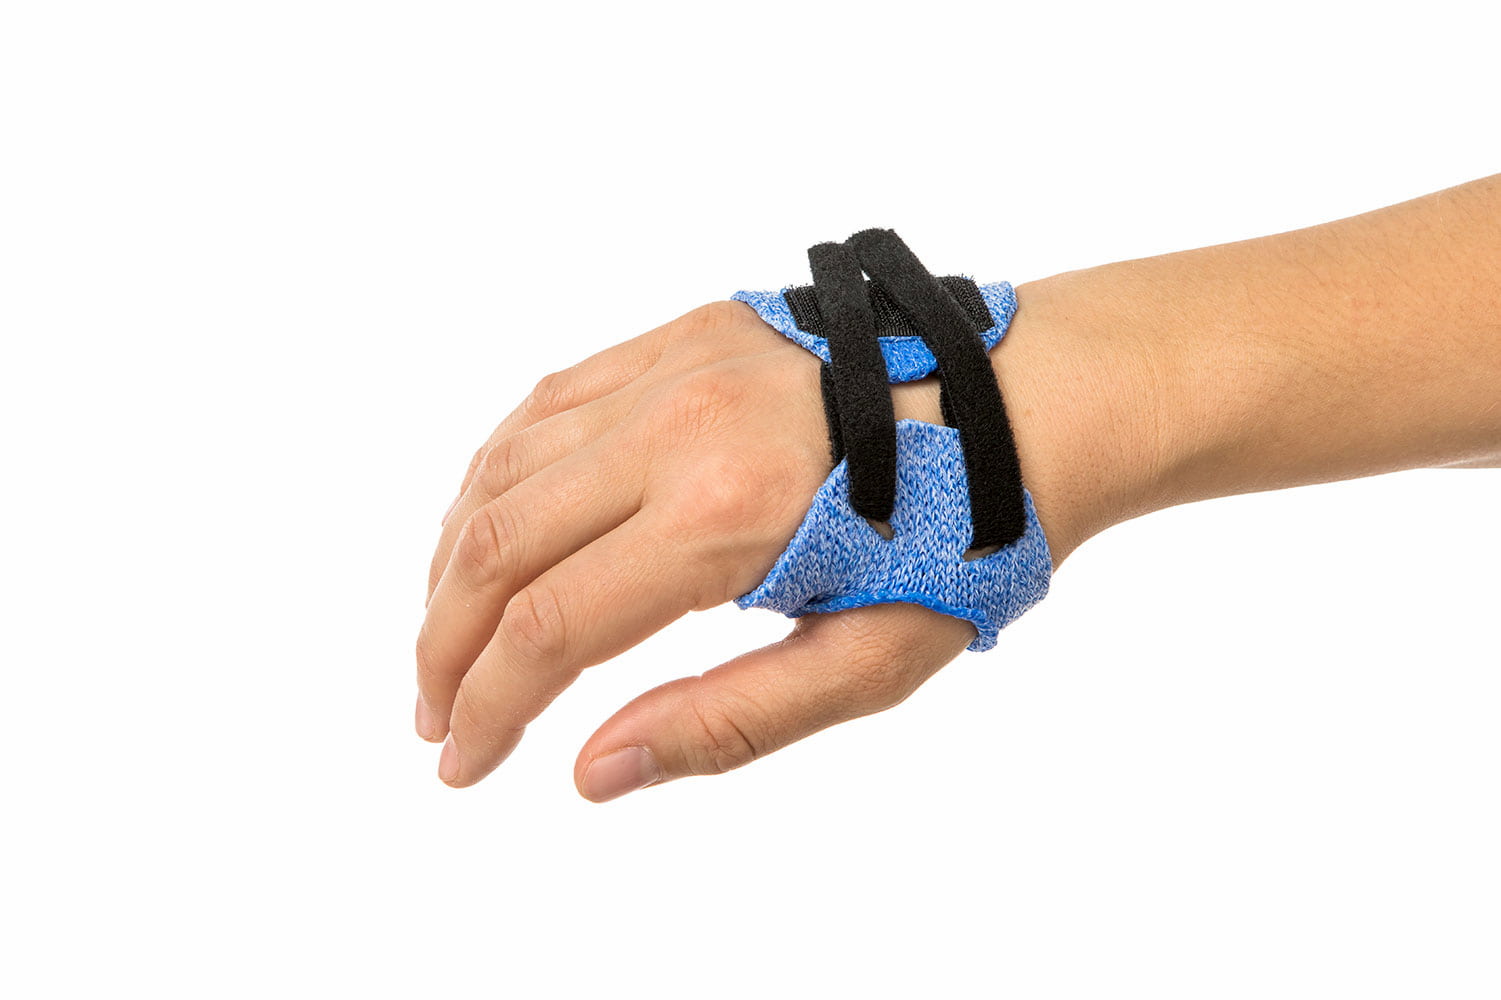 Dorsal orthosis in Orficast Blue